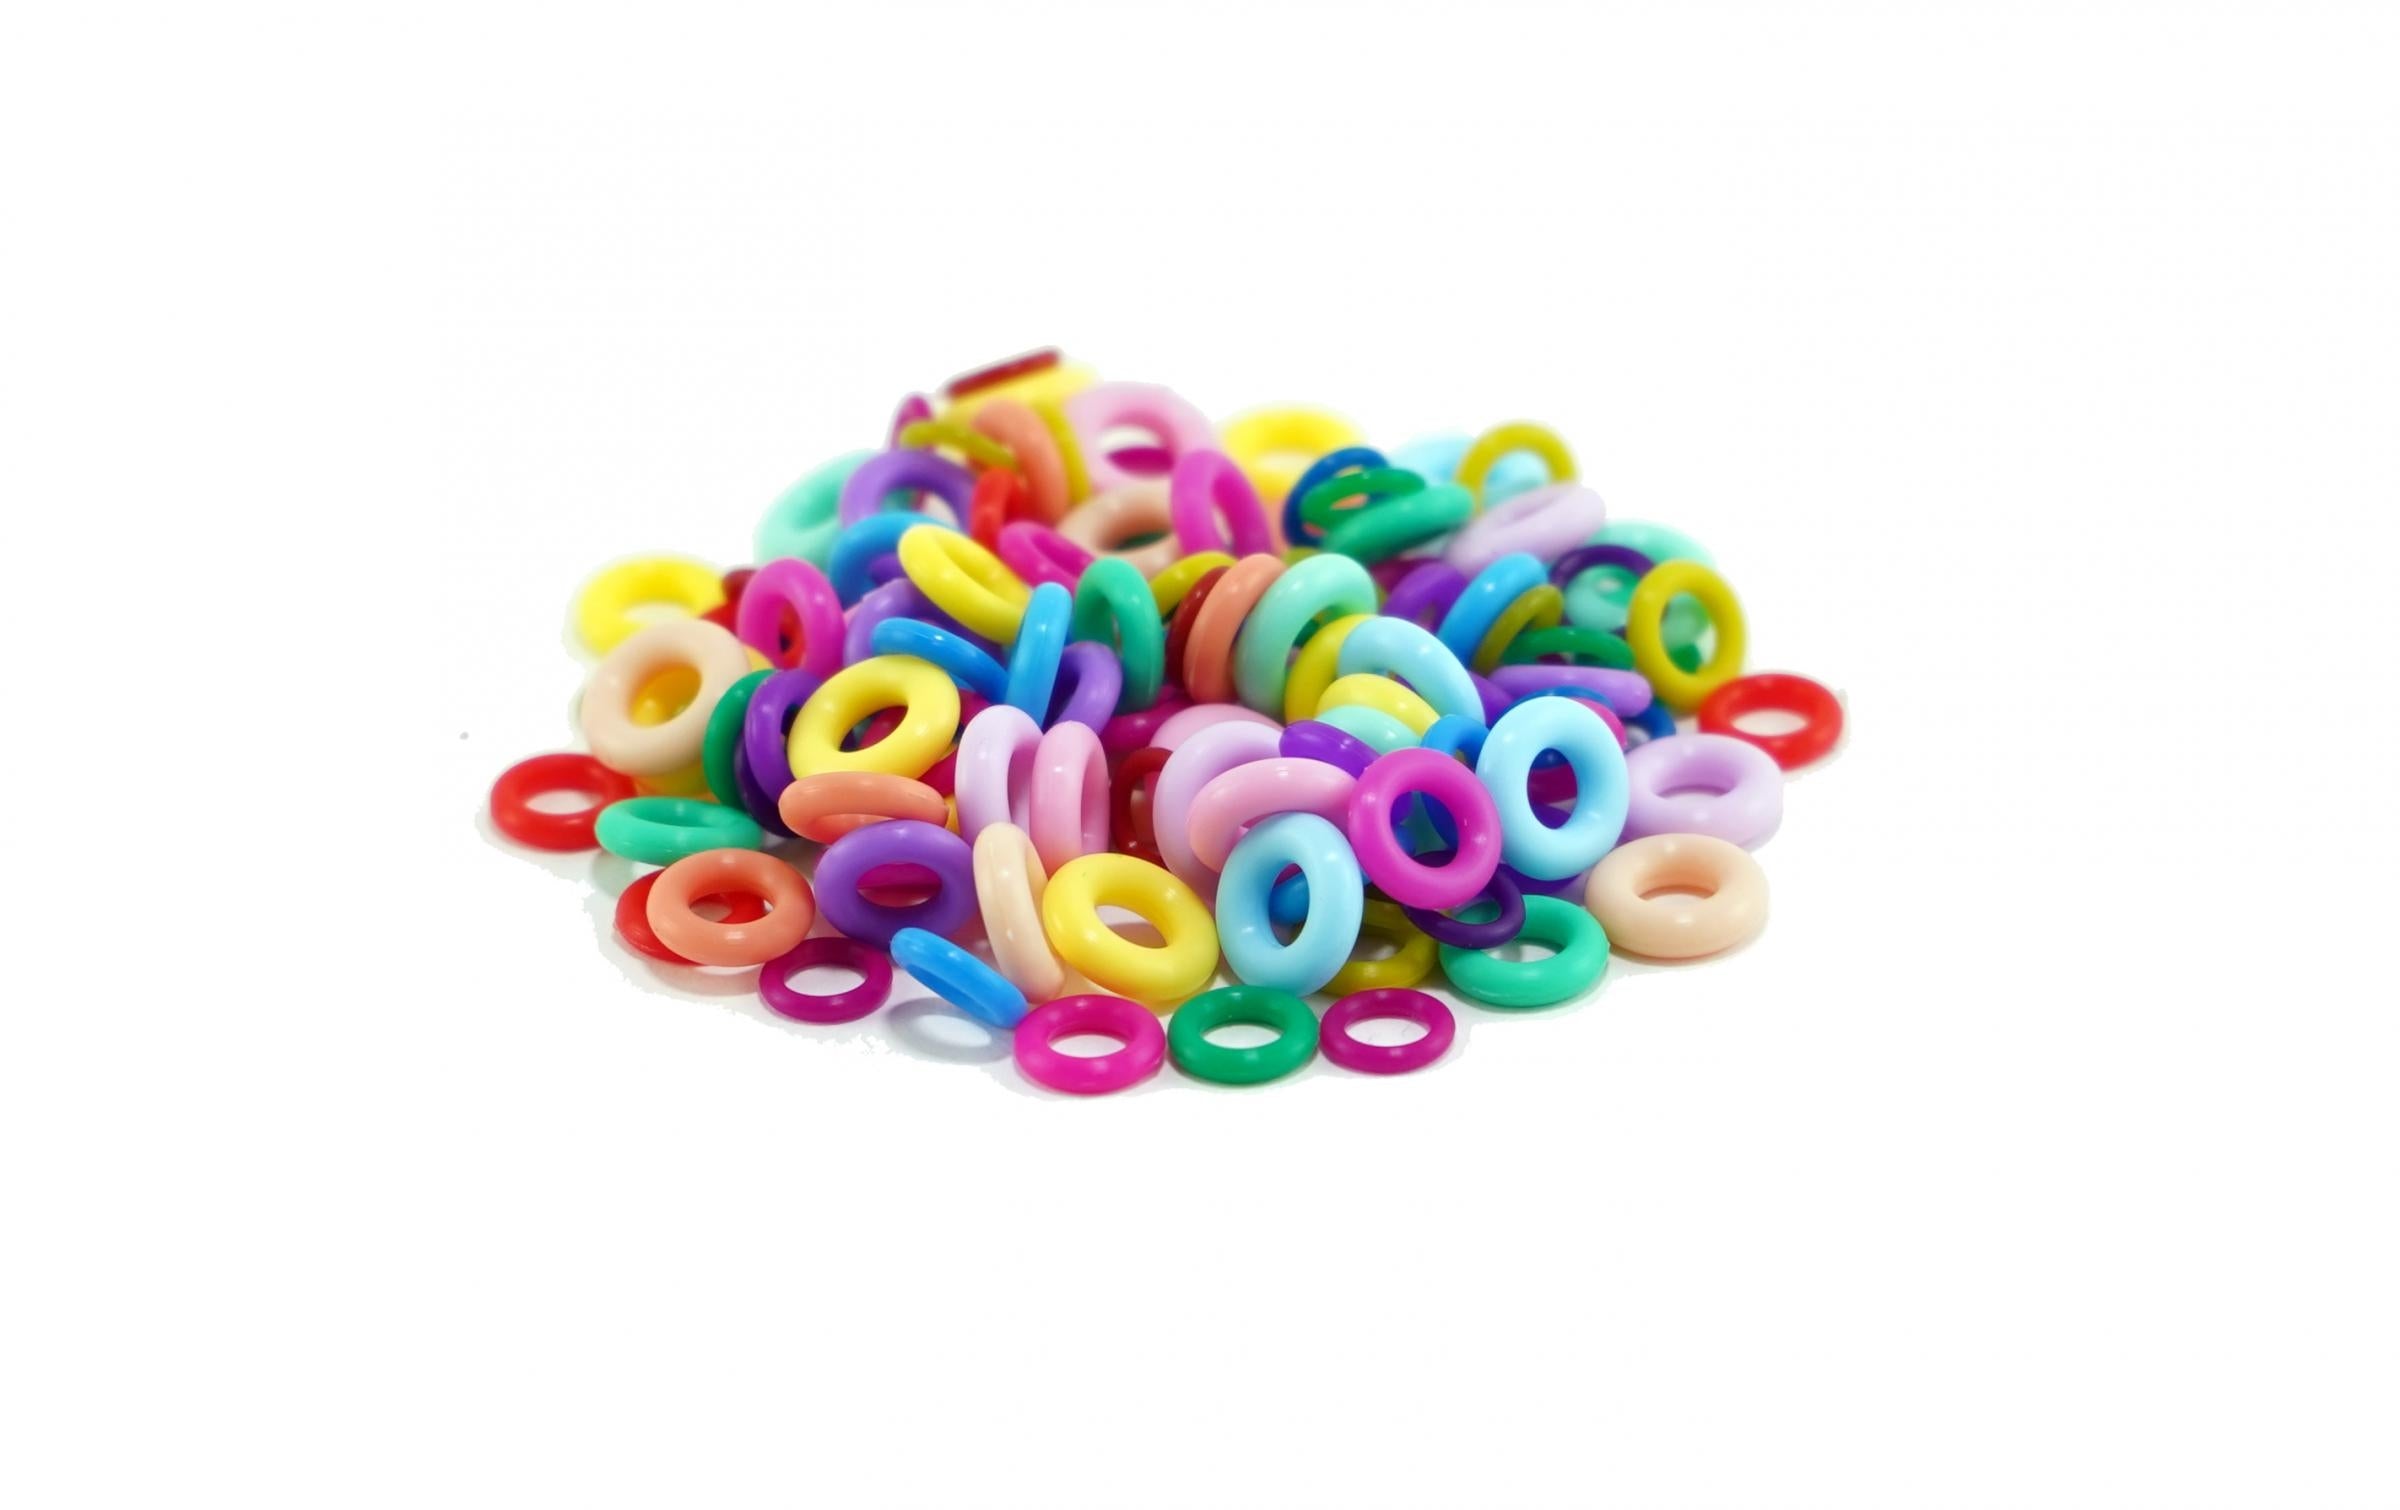 MK Pro Rings Silicone Switch Dampening O-rings Sampler (120 Pack) MKNHOABLH7 |0|